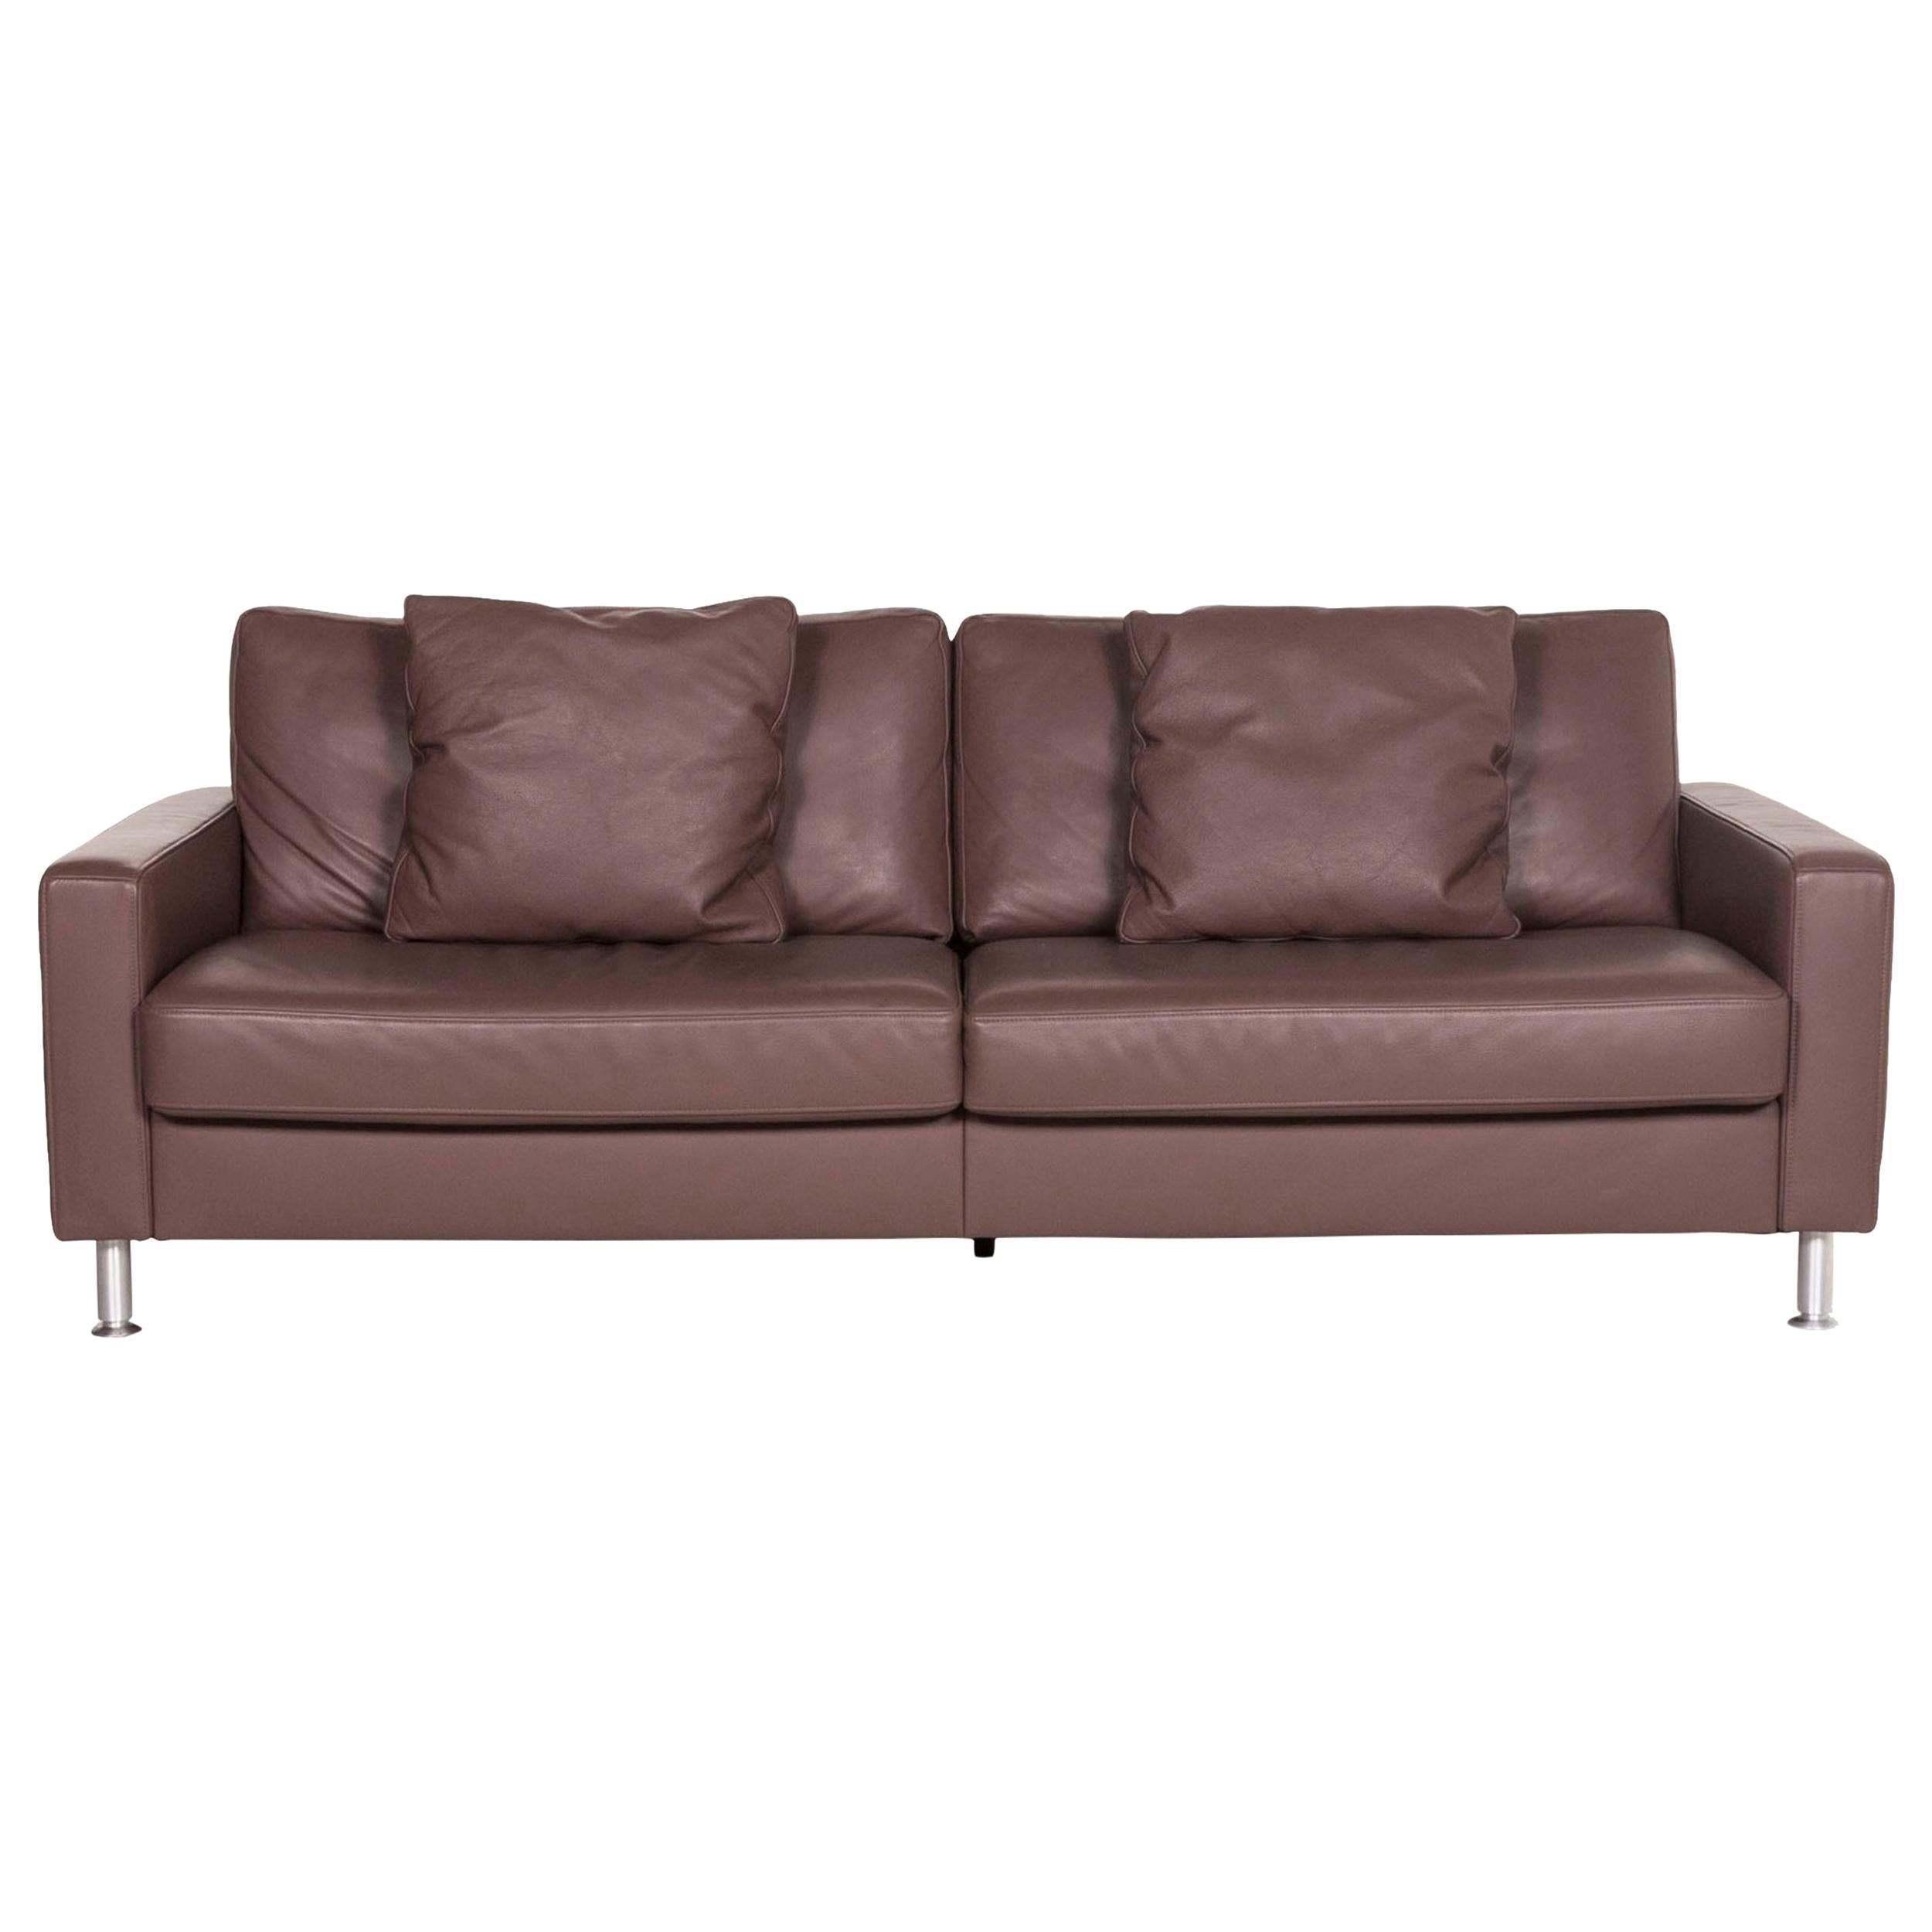 Ewald Schillig Leather Sofa Brown Three-Seat Couch For Sale